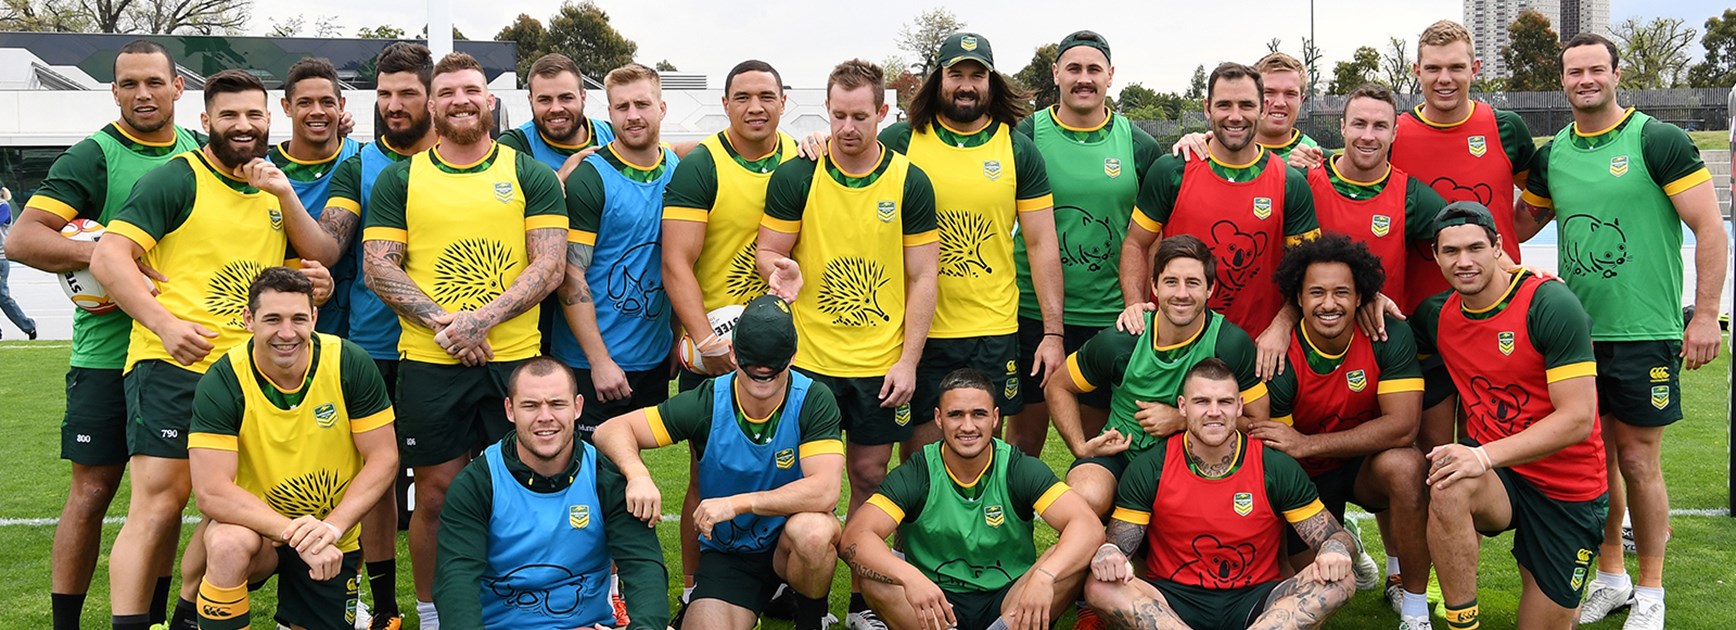 Australian players appear relaxed at training in Melbourne ahead of their World Cup opener against England.